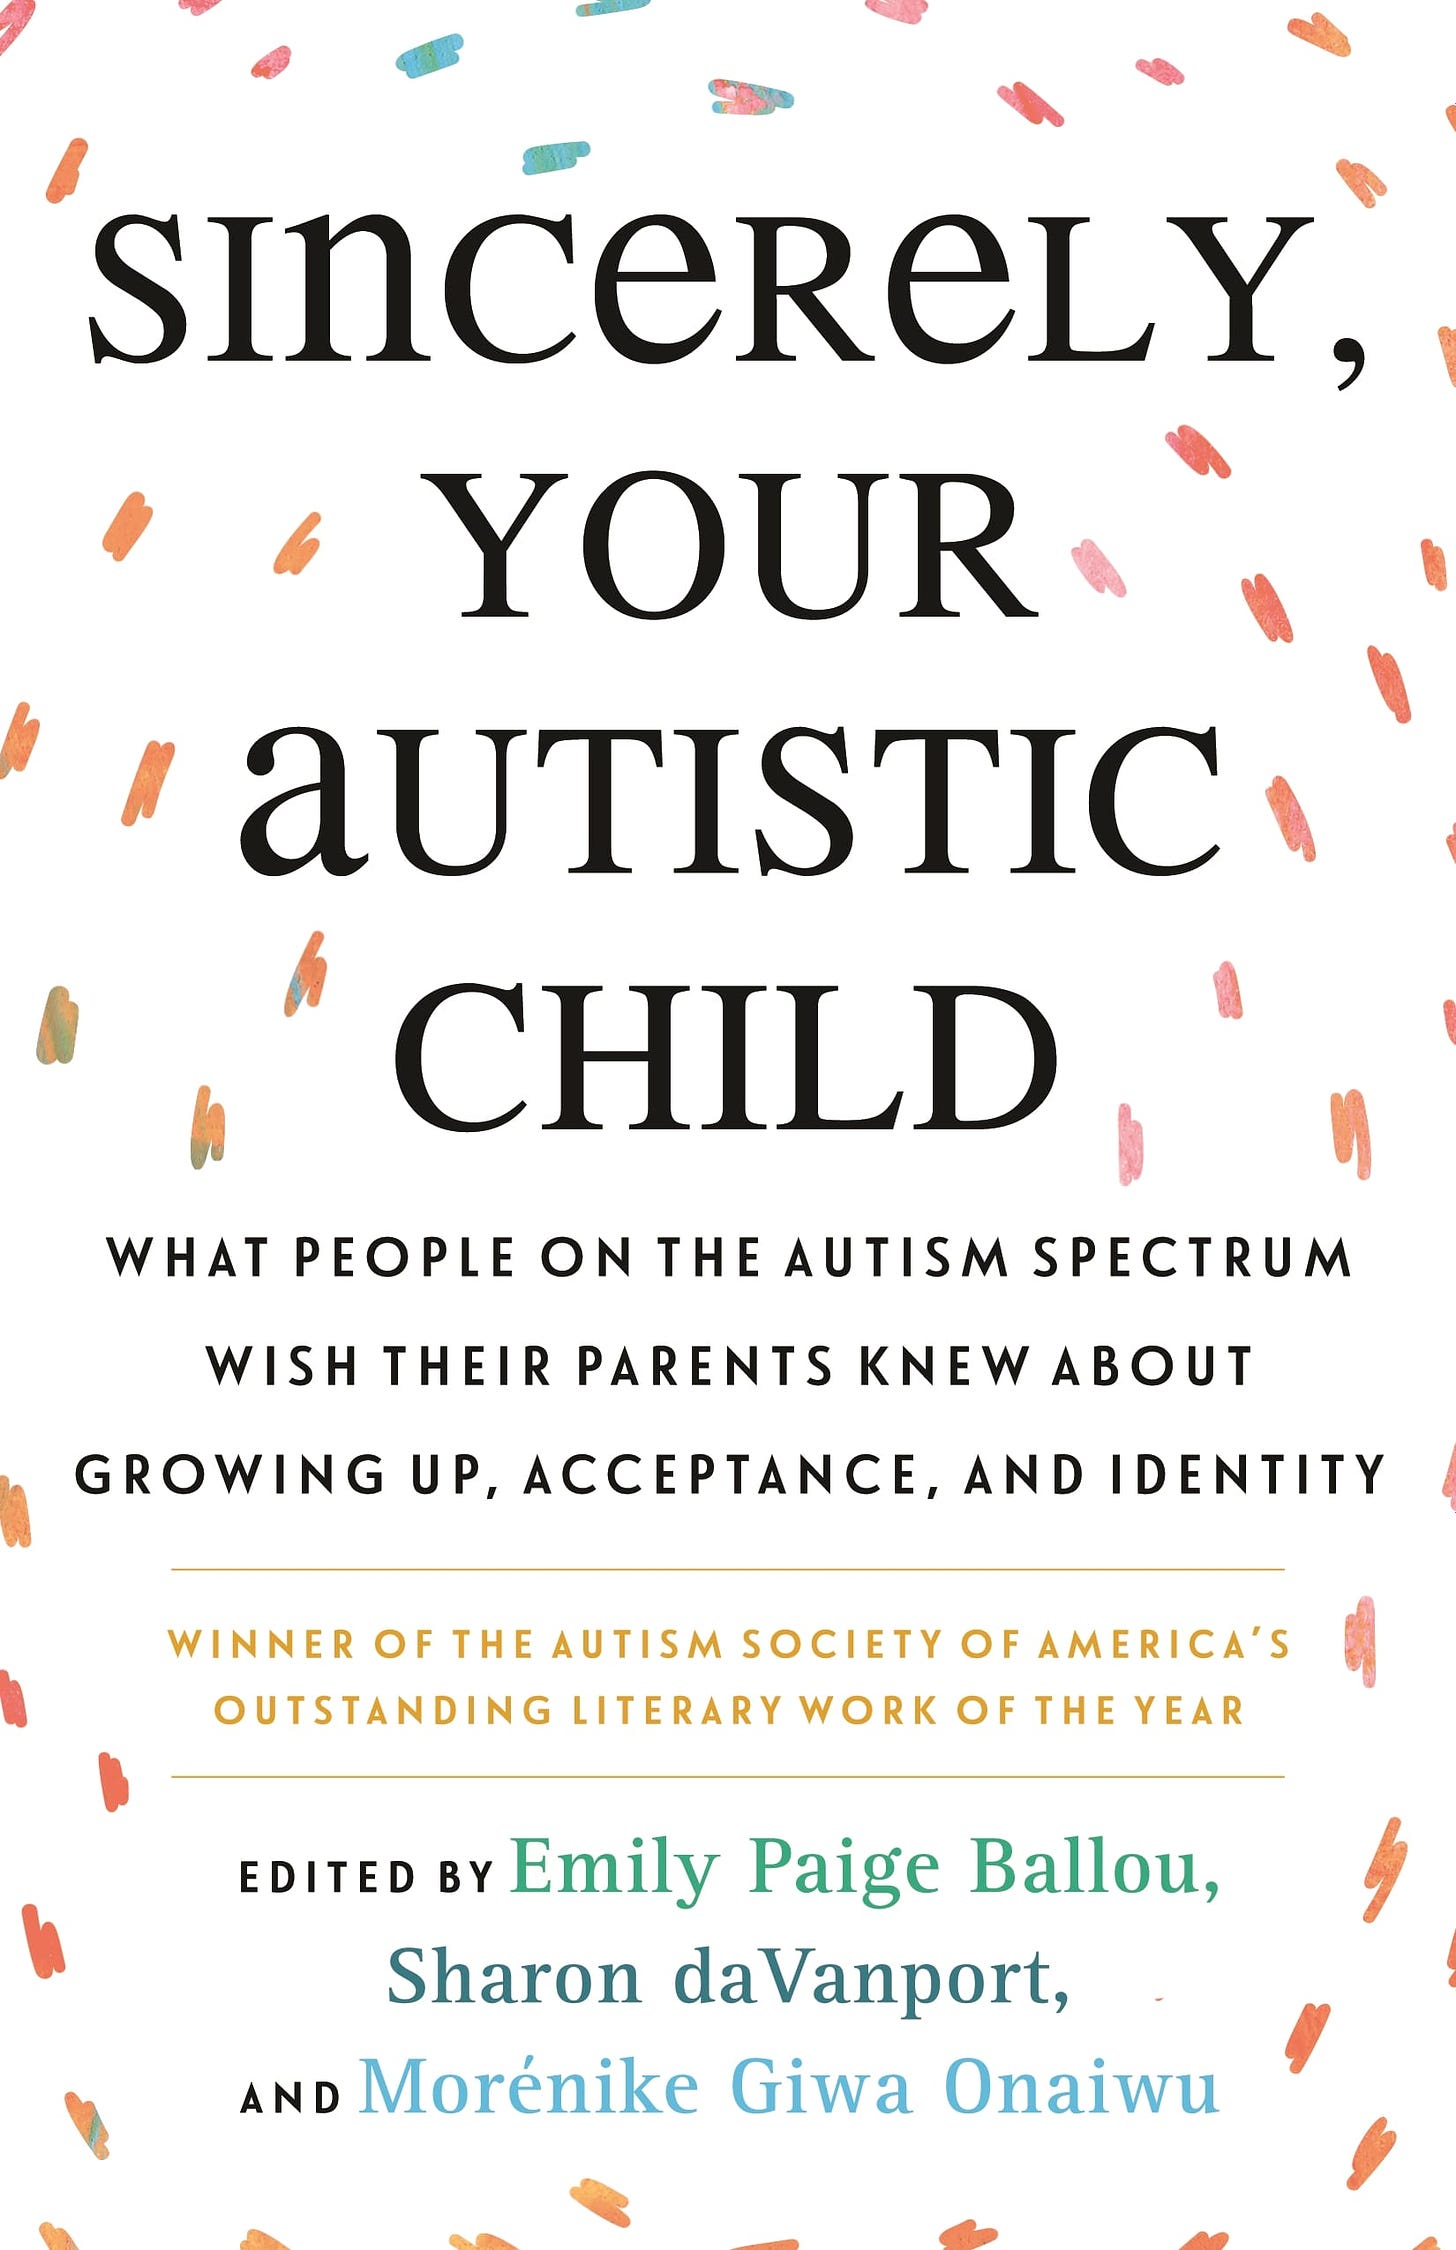 White background with orbiting multi-color-speckled brushstrokes. Title (in bolded black text): “Sincerely, Your Autistic Child: What People on the Autism Spectrum Wish Their Parents Knew About Growing Up, Acceptance, and Identity." Below it, in gold: "Winner of the Autism Society of America's Outstanding Literary Work of the Year." Below it: "Edited by Emily Paige Ballou, Sharon daVanport, and Morénike Giwa Onaiwu" Cover Design by Louis Roe.